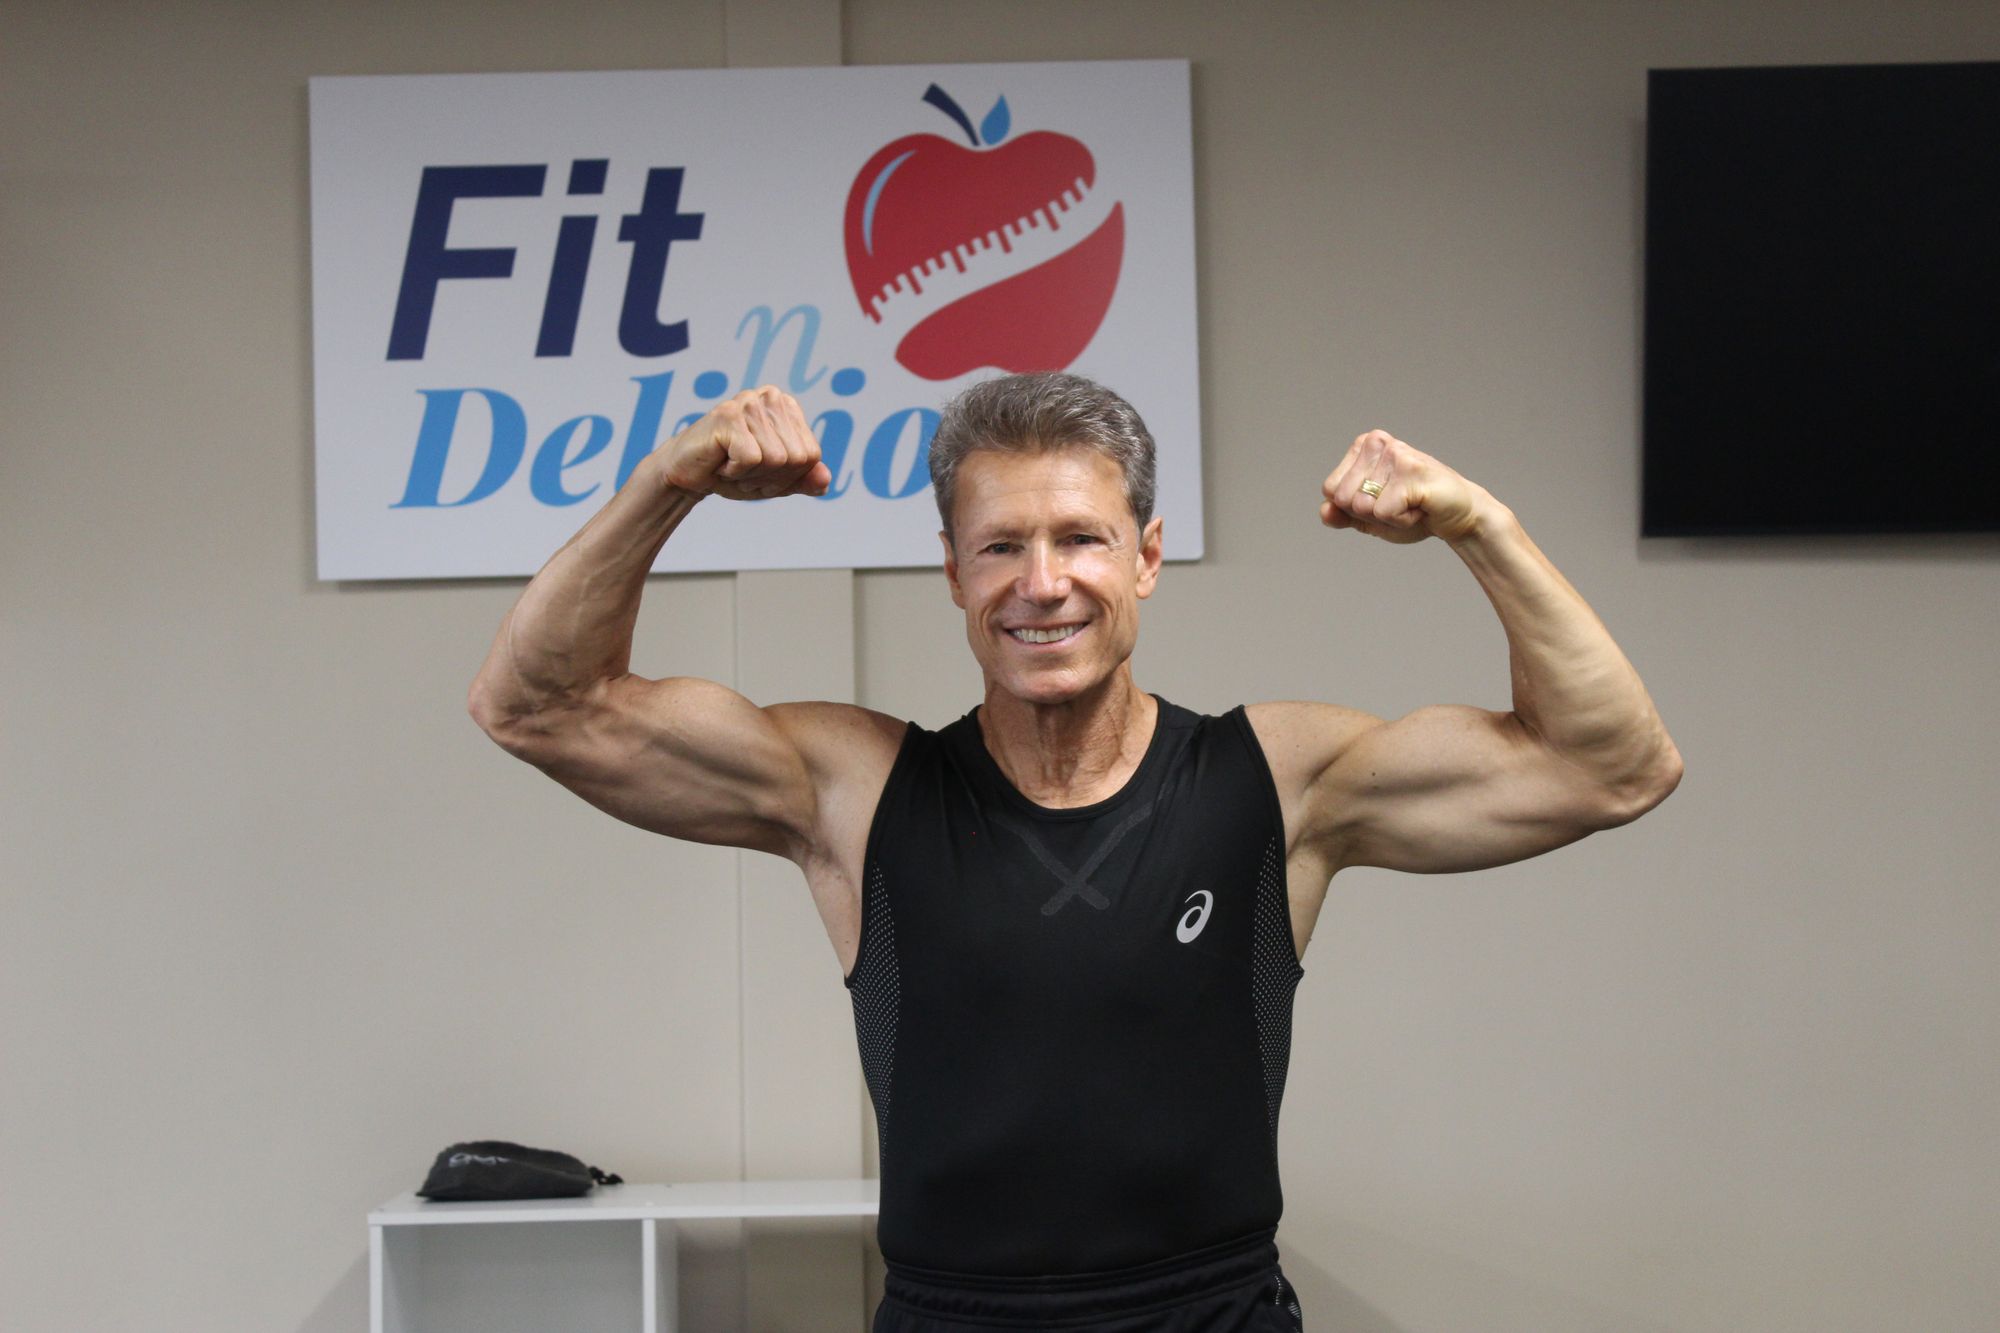 Changing Lives One Body at a Time! - Fit n Delicious